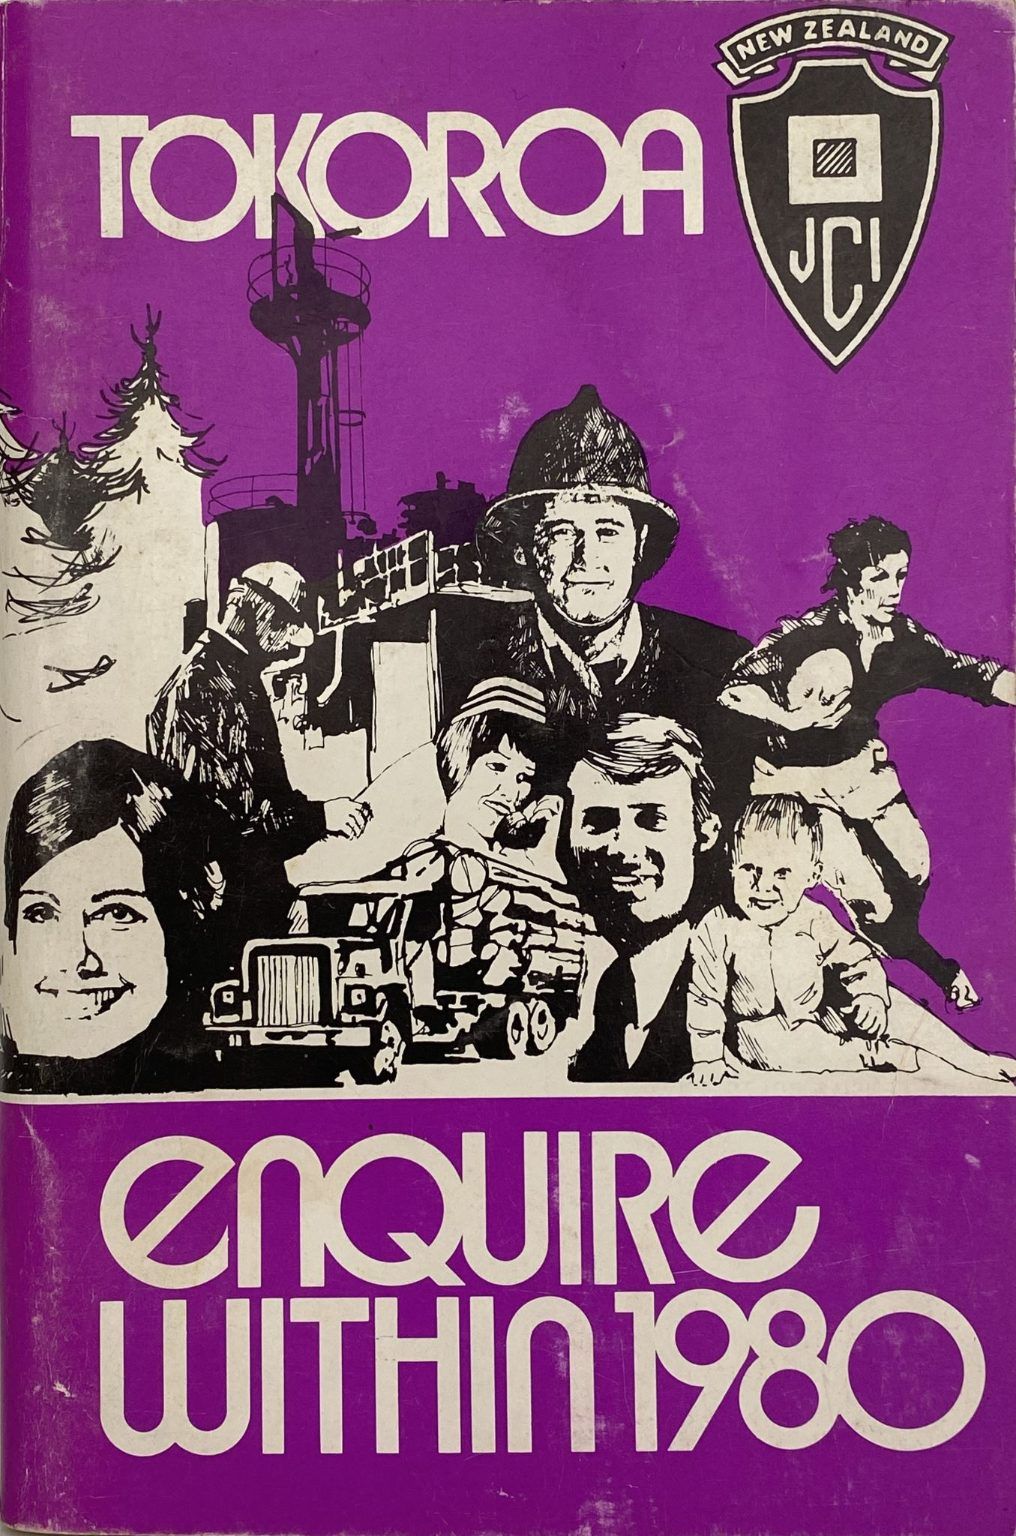 VINTAGE DIRECTORY: Tokoroa - Enquire Within 1980